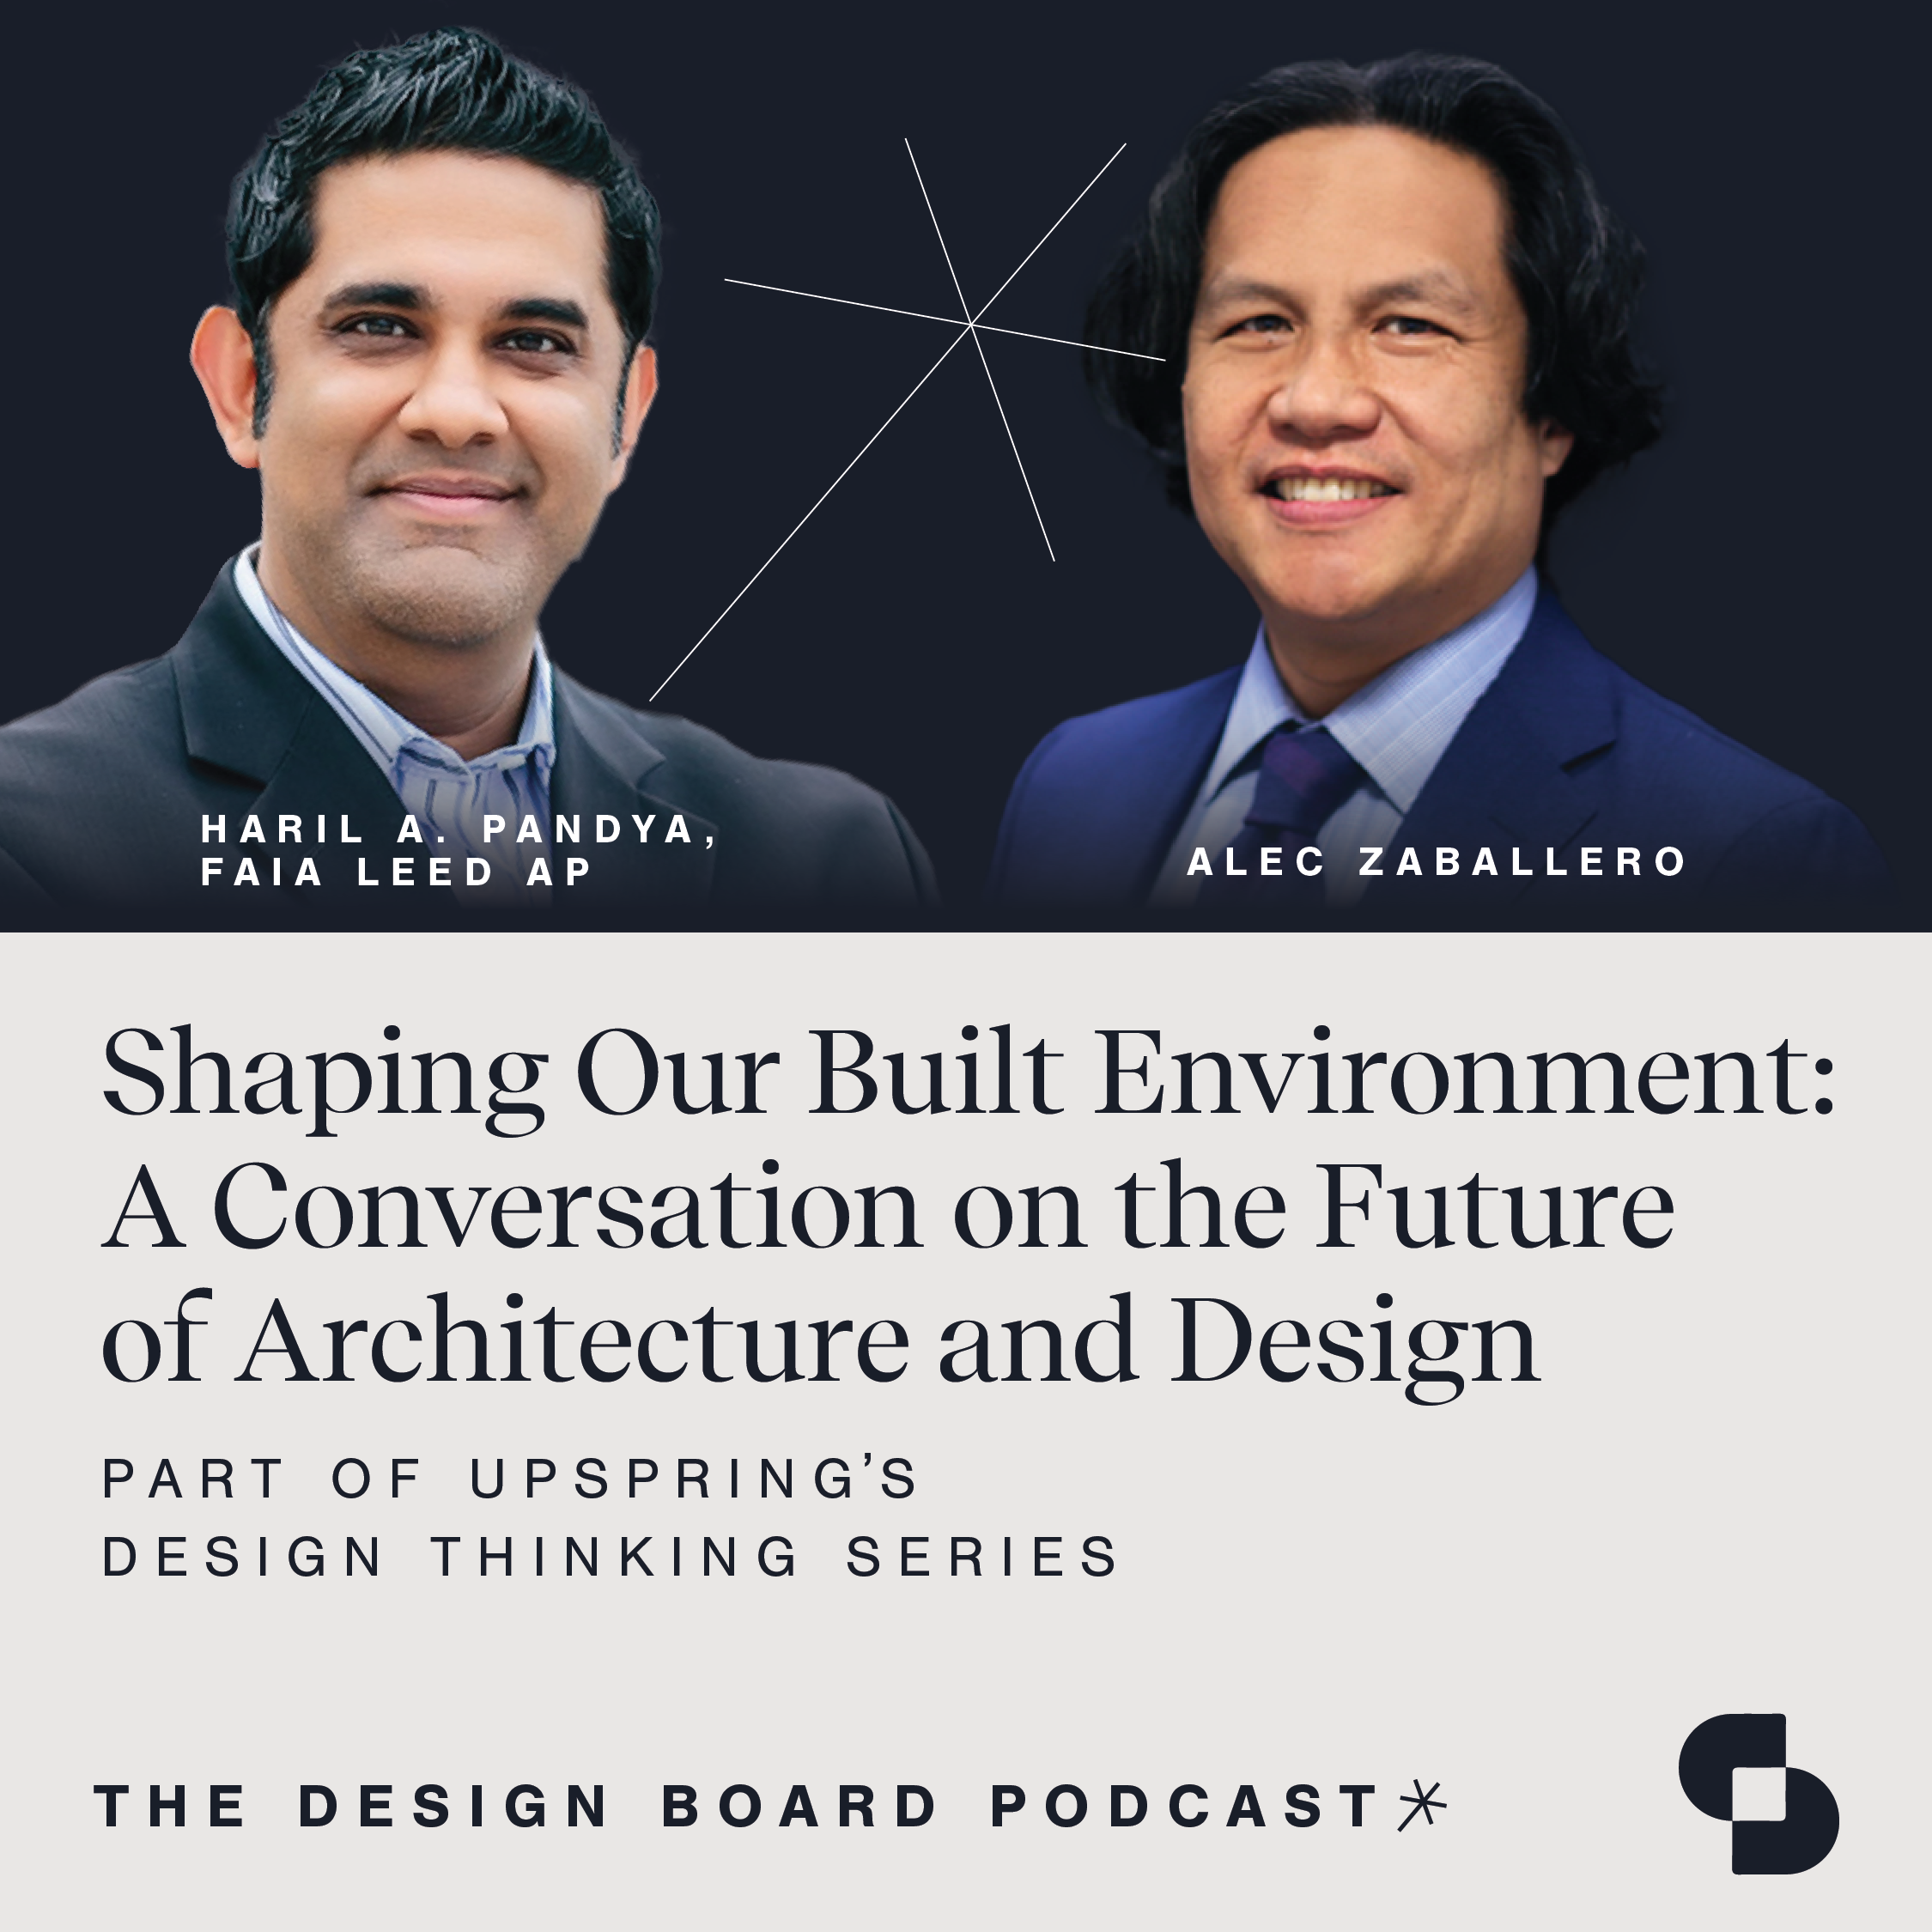 Shaping Our Built Environment: A Conversation on the Future of Architecture and Design episode cover art for The Design Board podcast